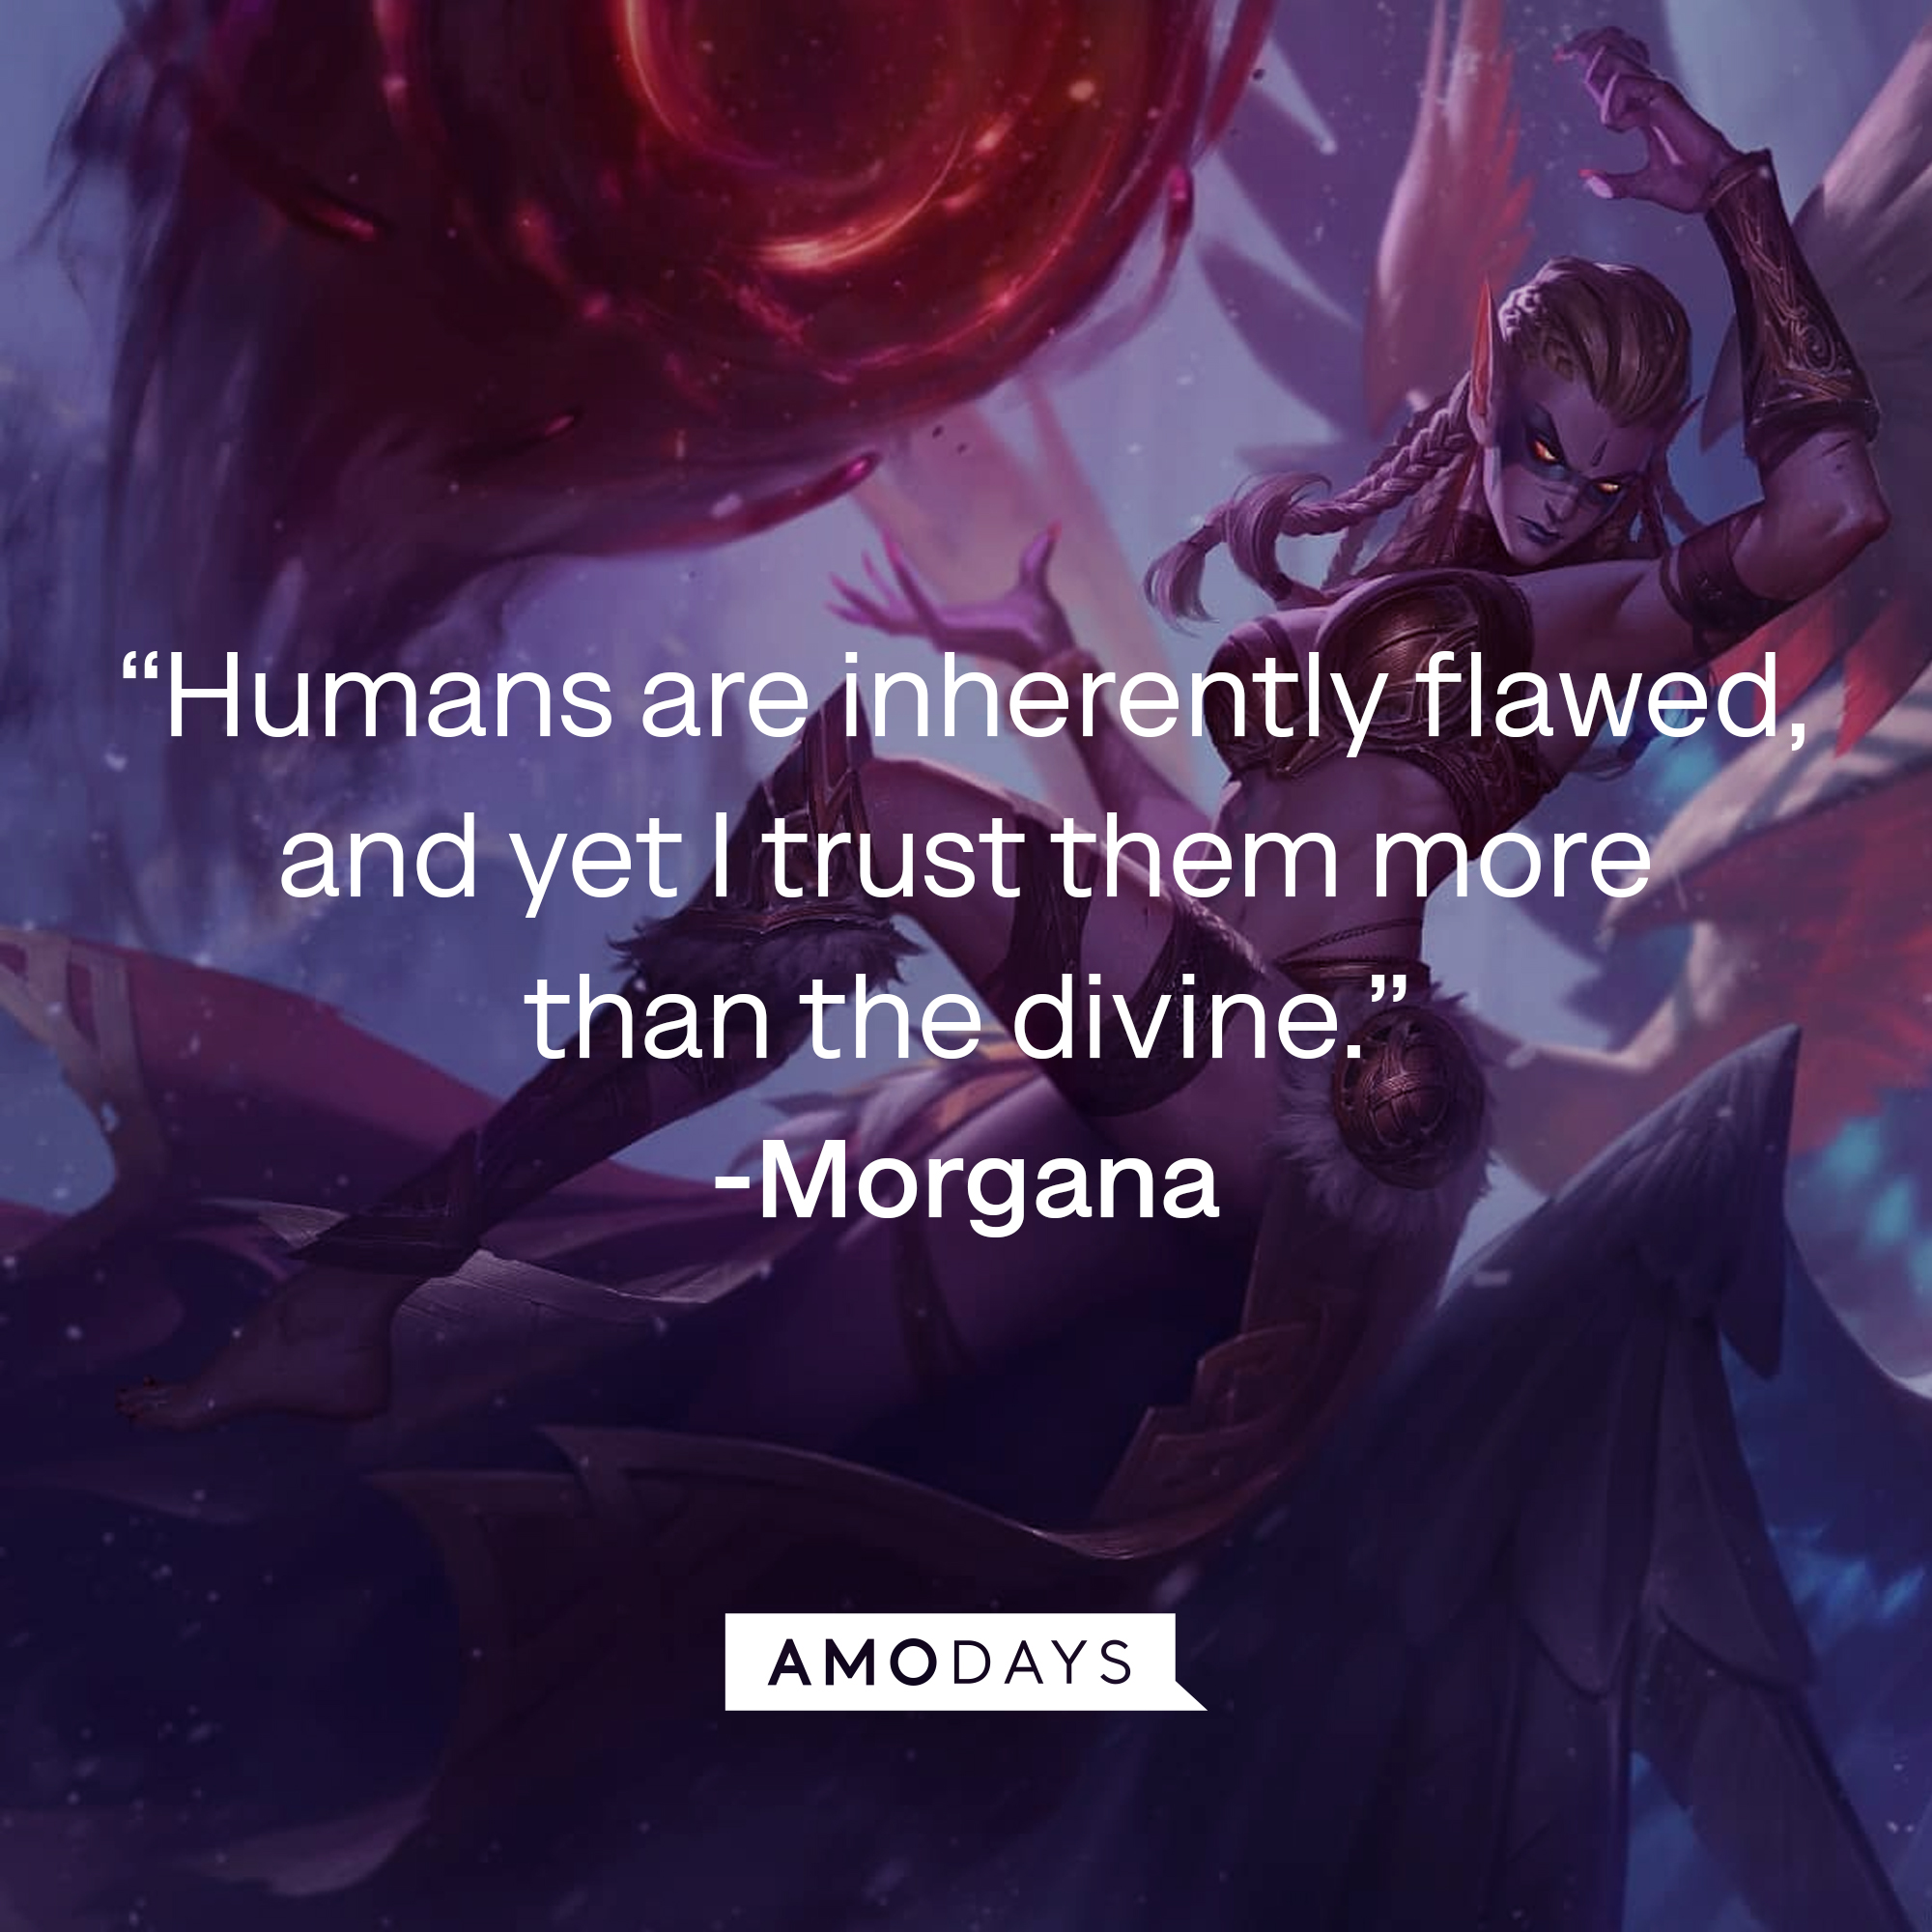 An image of Morgana, with her quote: “Humans are inherently flawed, and yet I trust them more than the divine.” | Source: Facebook.com/leagueoflegends